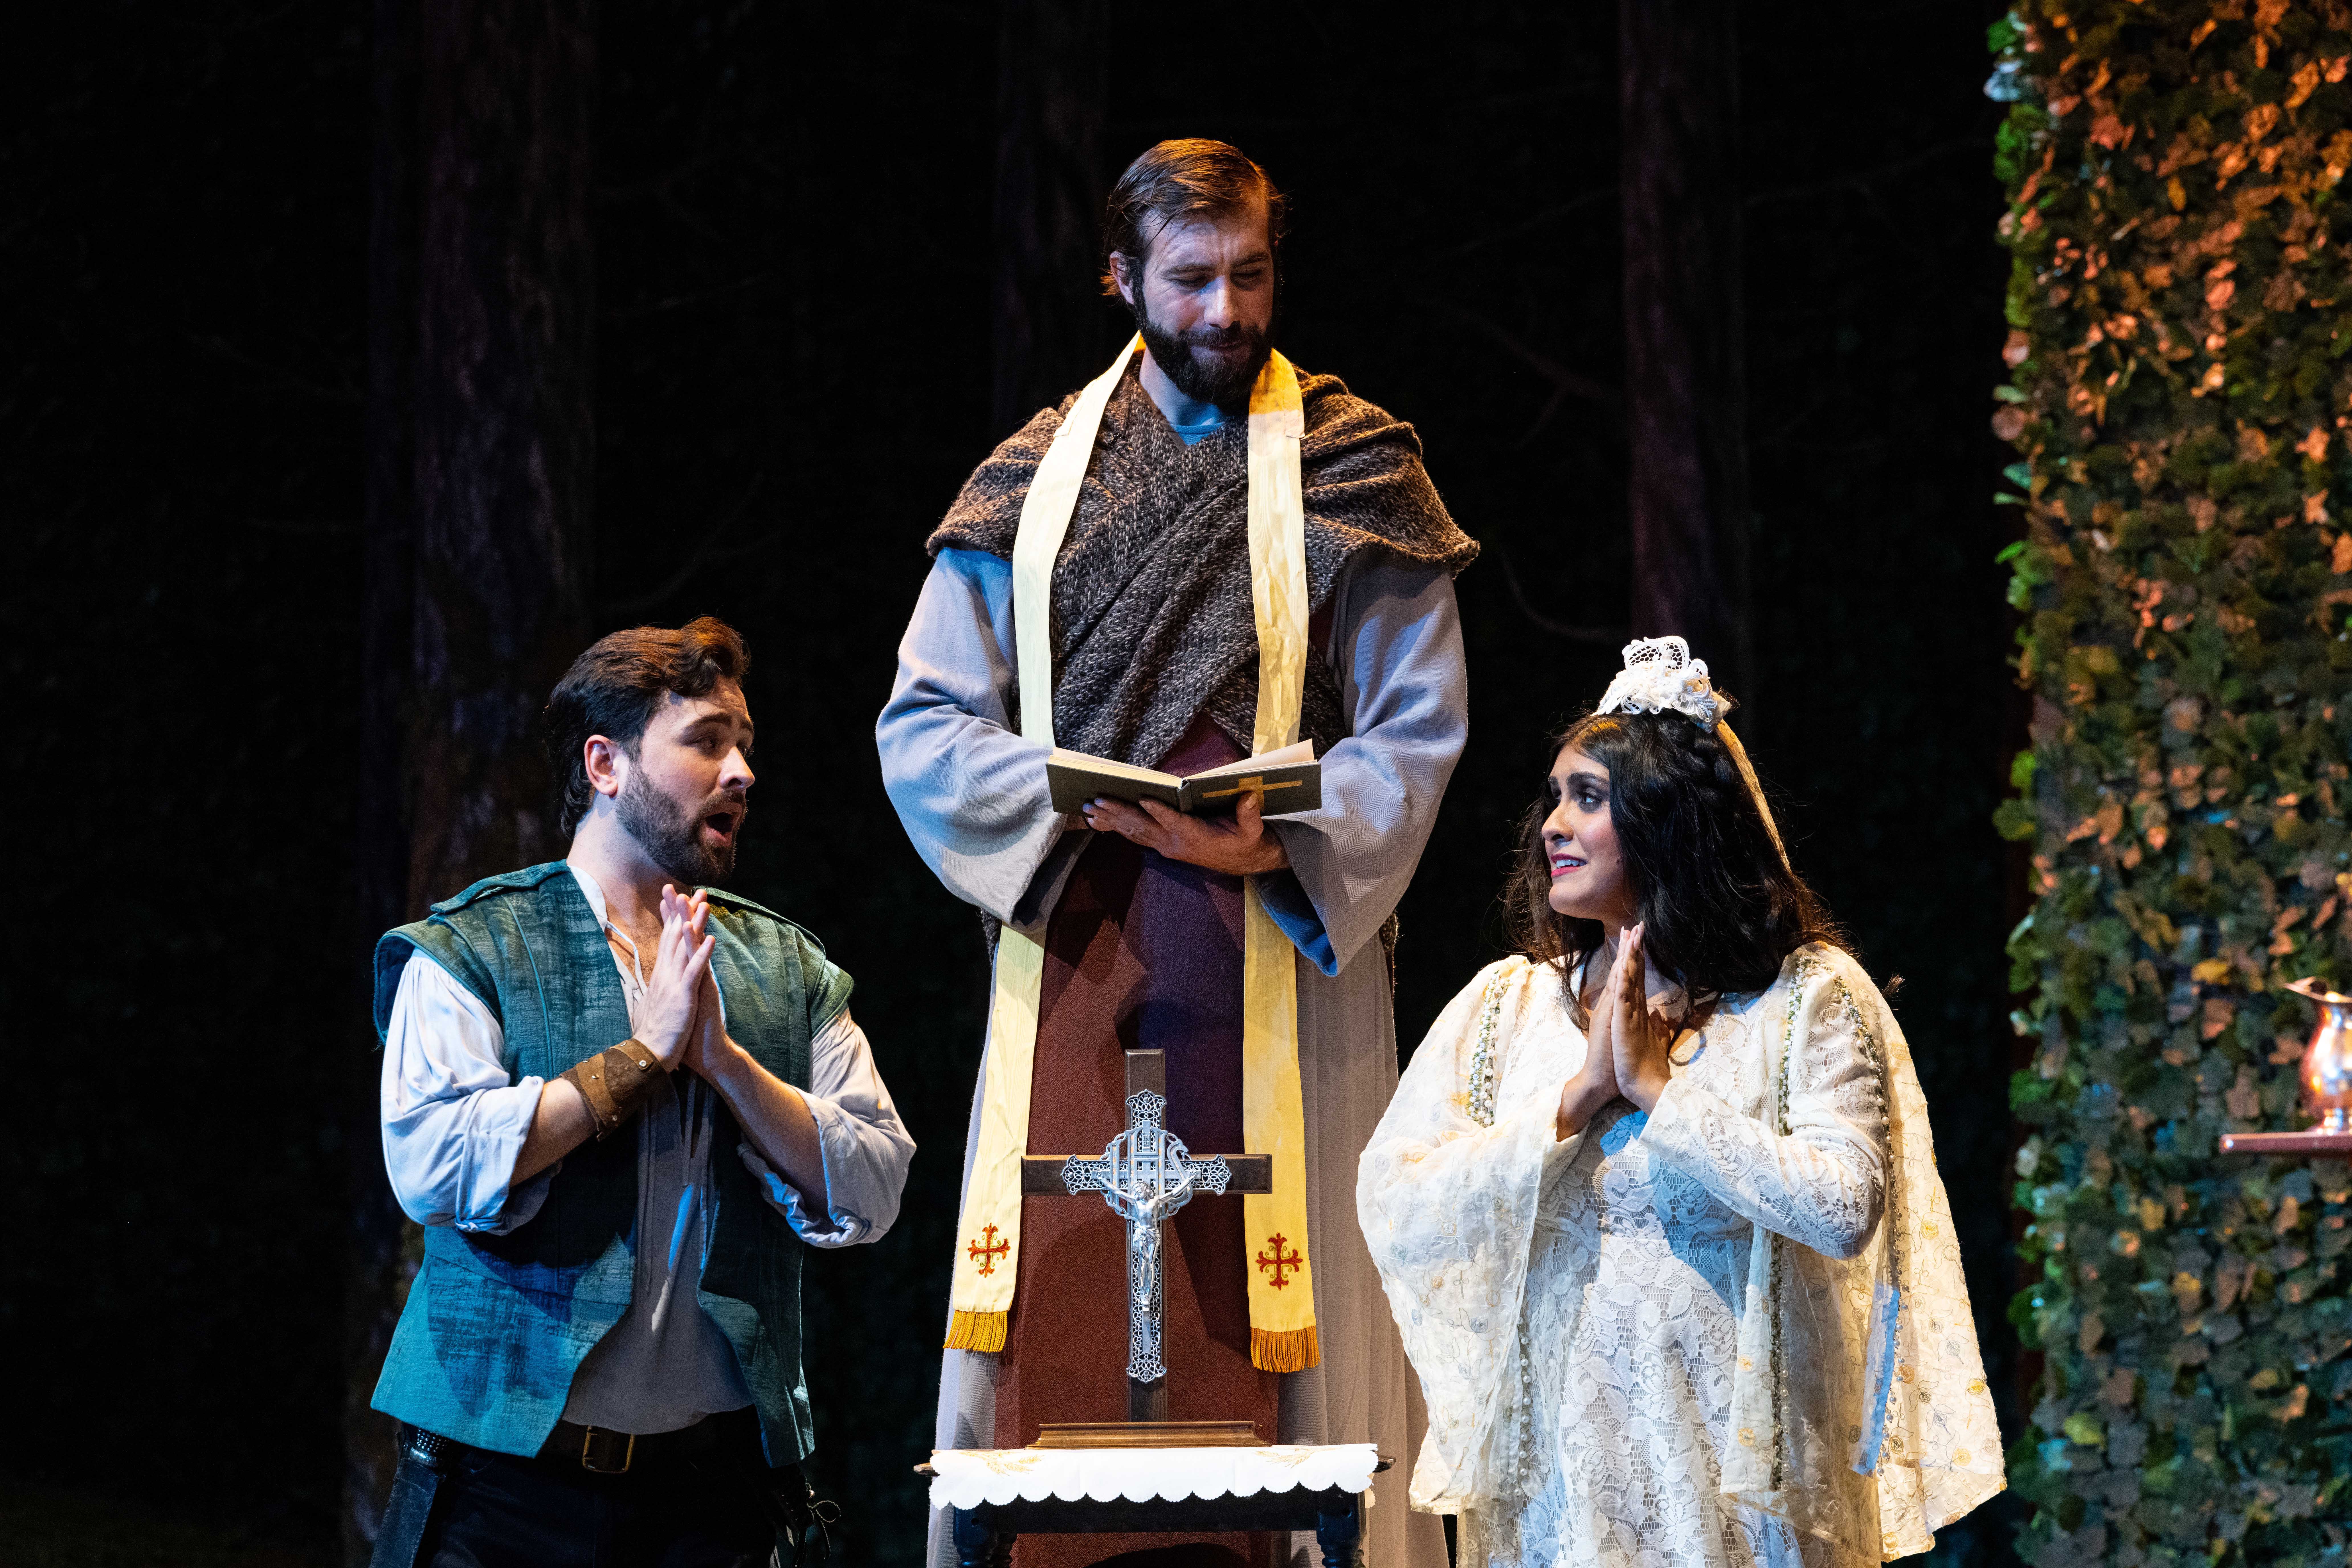 From L to R: Joshua Sanders, Vartan Gabrielian, and Melissa Sondhi in Opera San José’s all-new production of "Romeo and Juliet" September 9-24 at the California Theatre. 
Photo credit: Kristen Loken